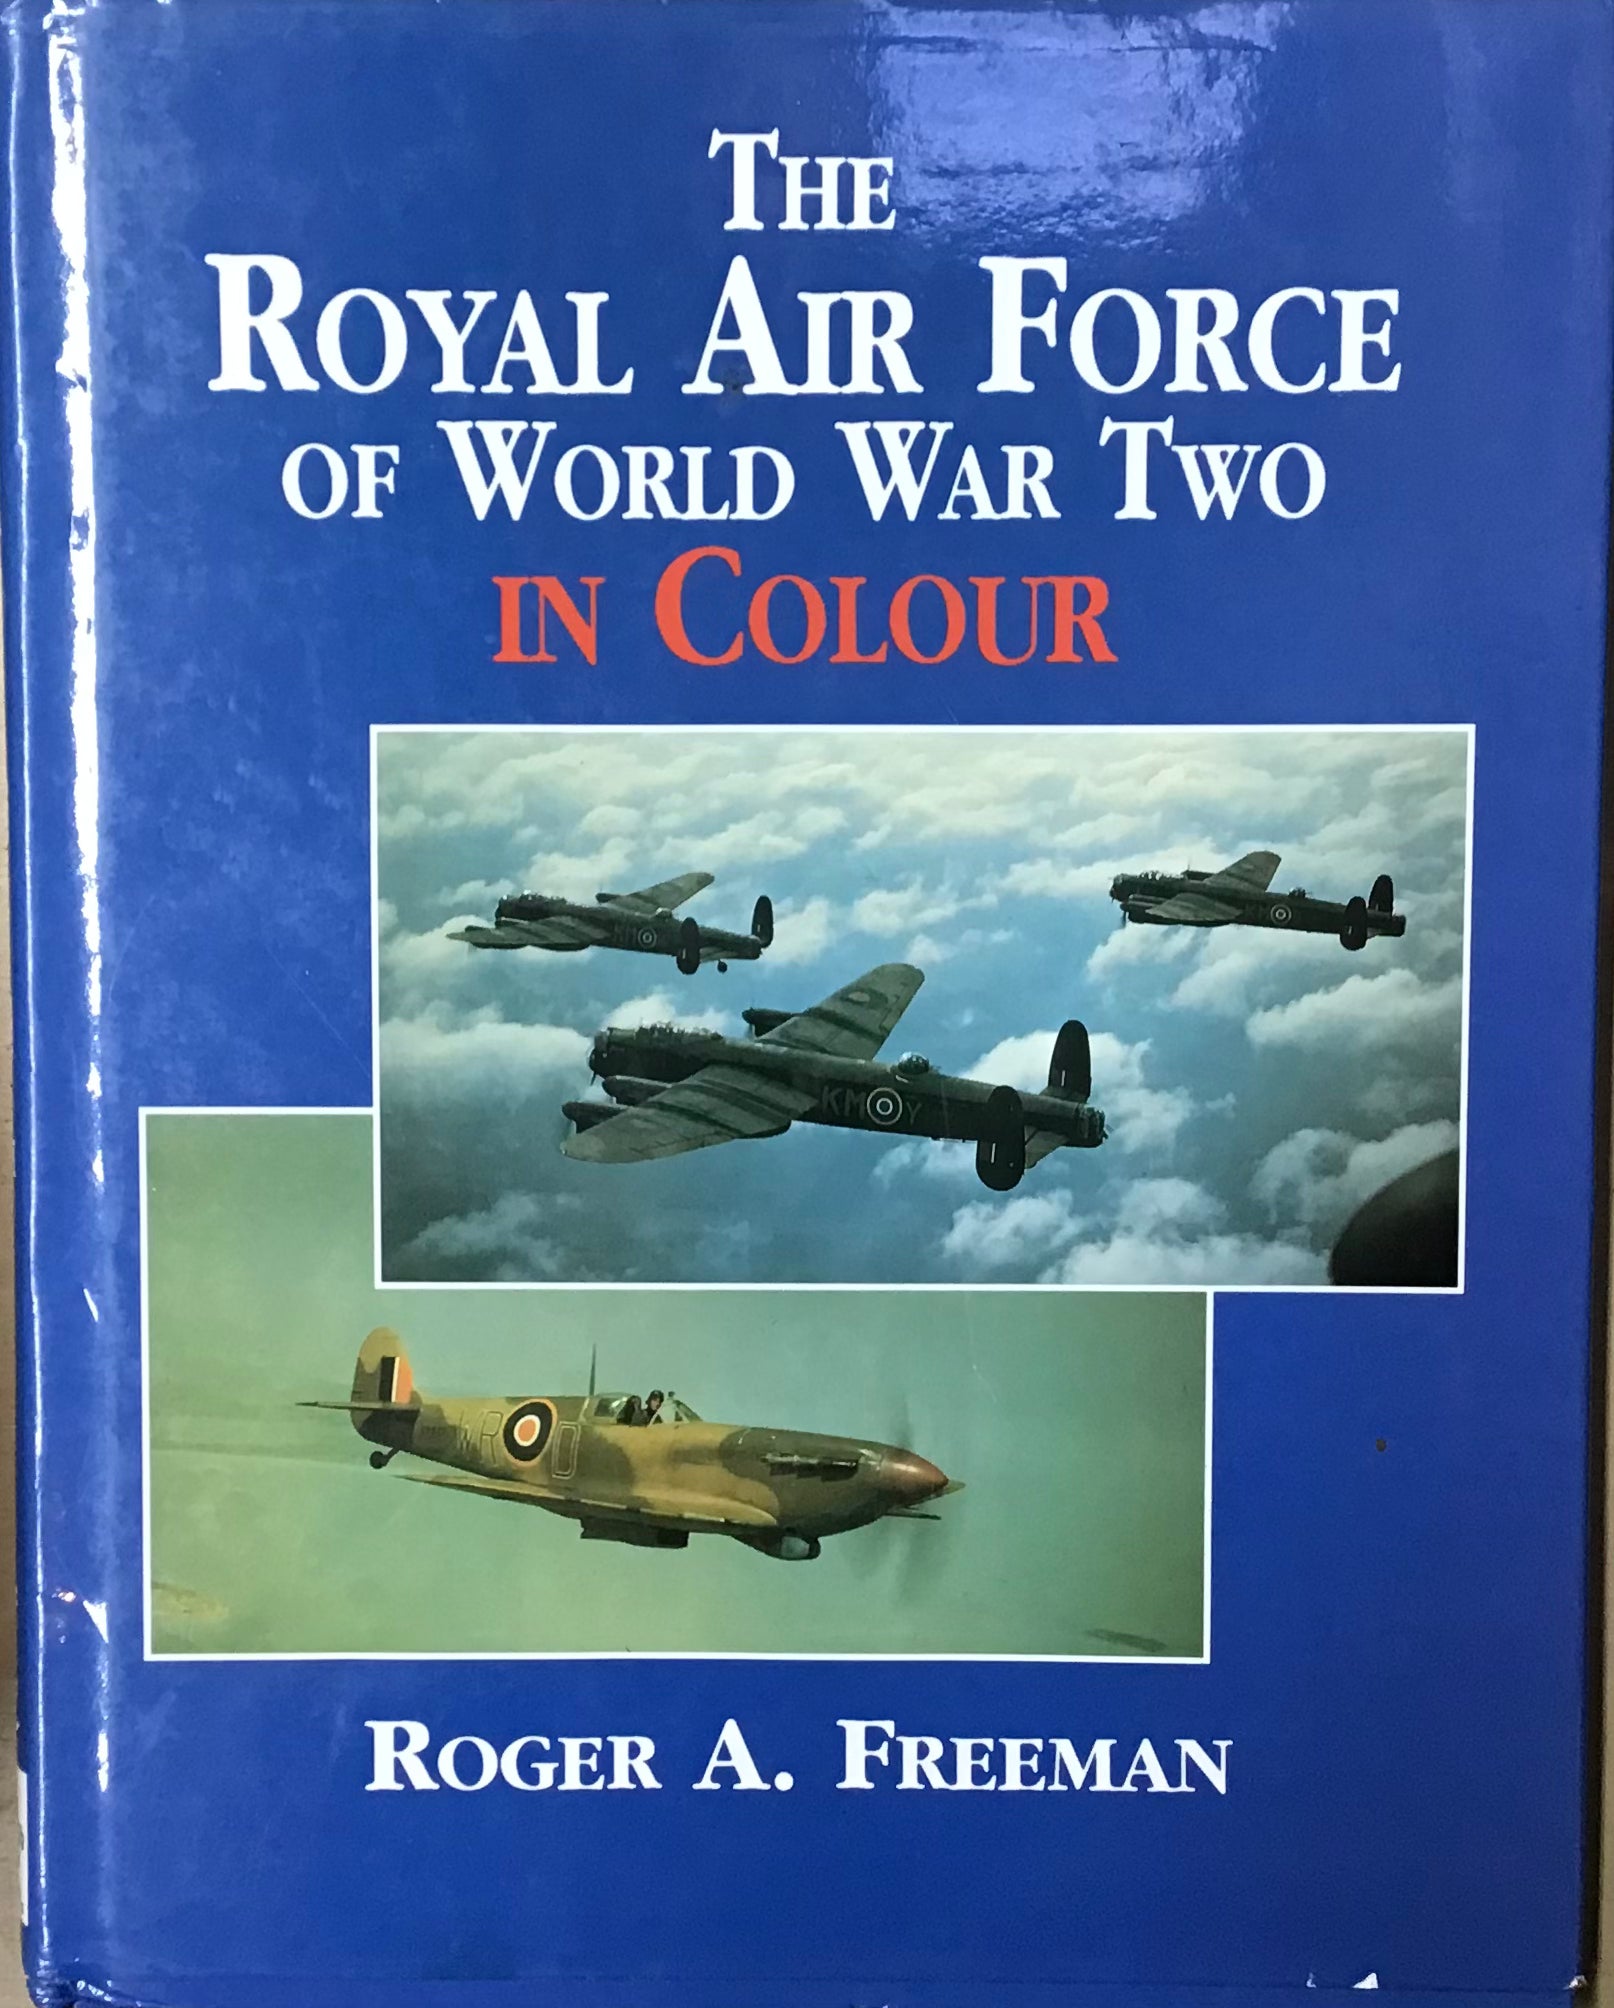 The Royal Air Force of World War Two In Colour by Roger A. Freeman - Chester Model Centre